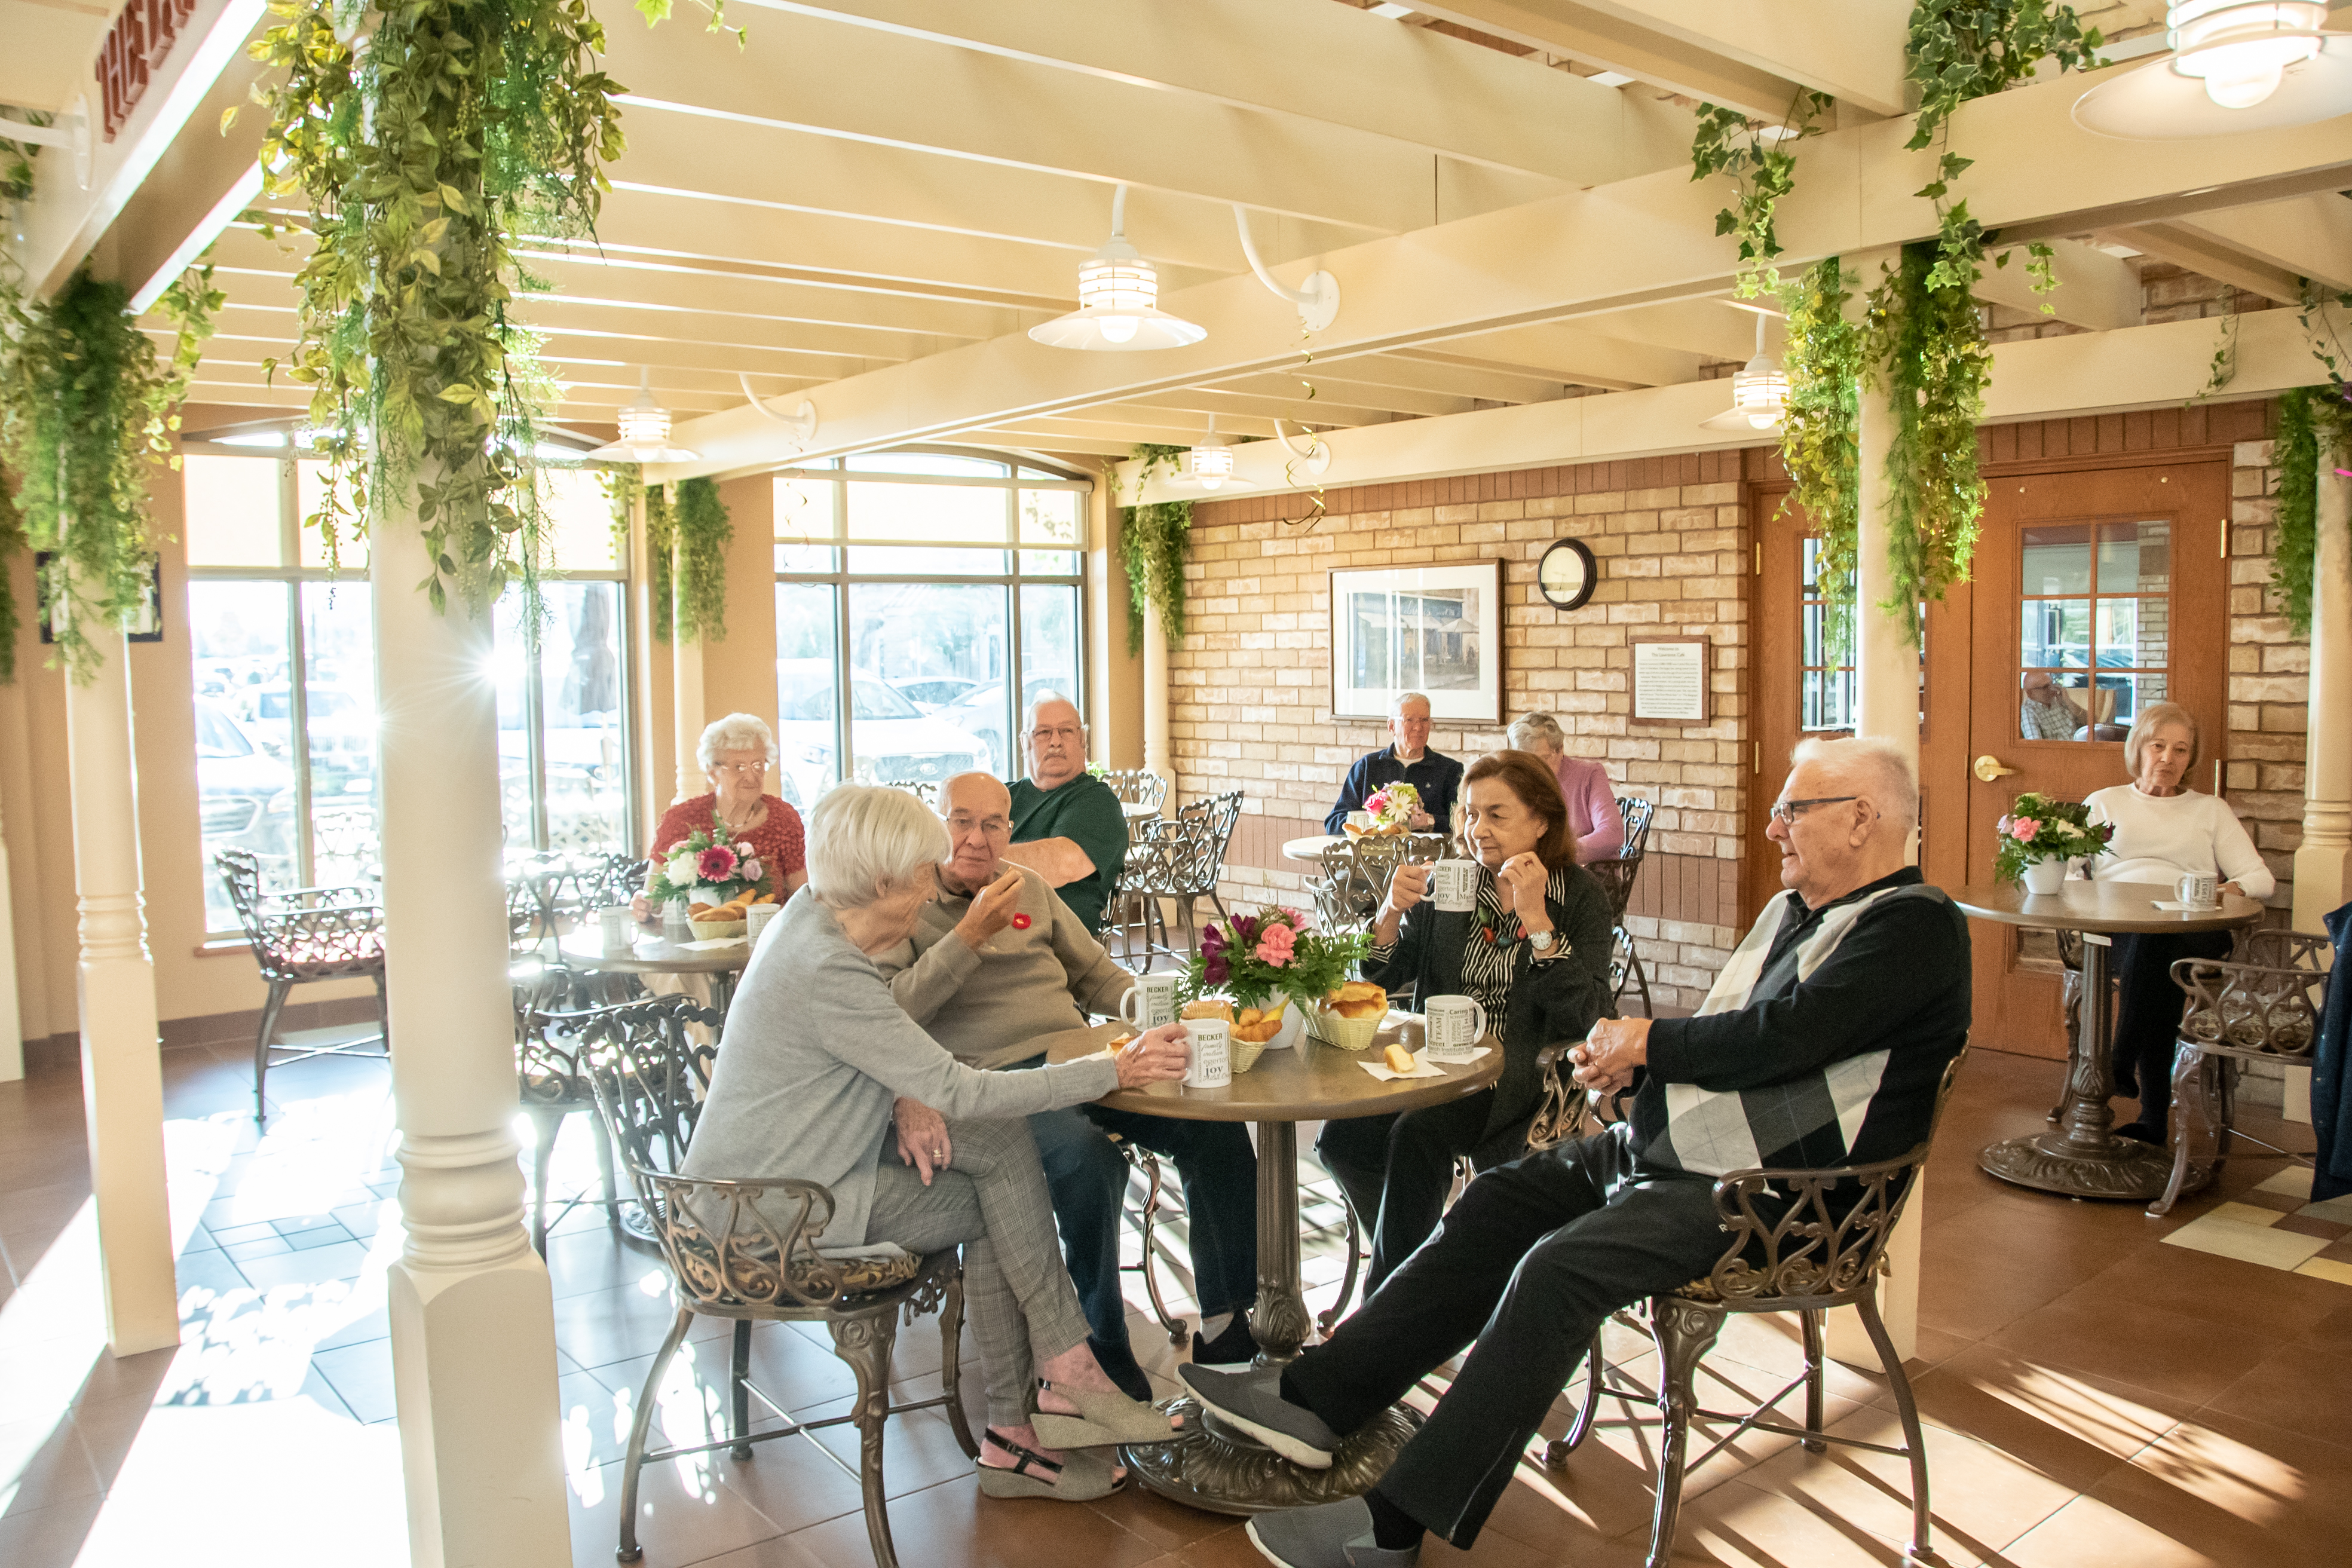 Residents socializing in the Village Cafe